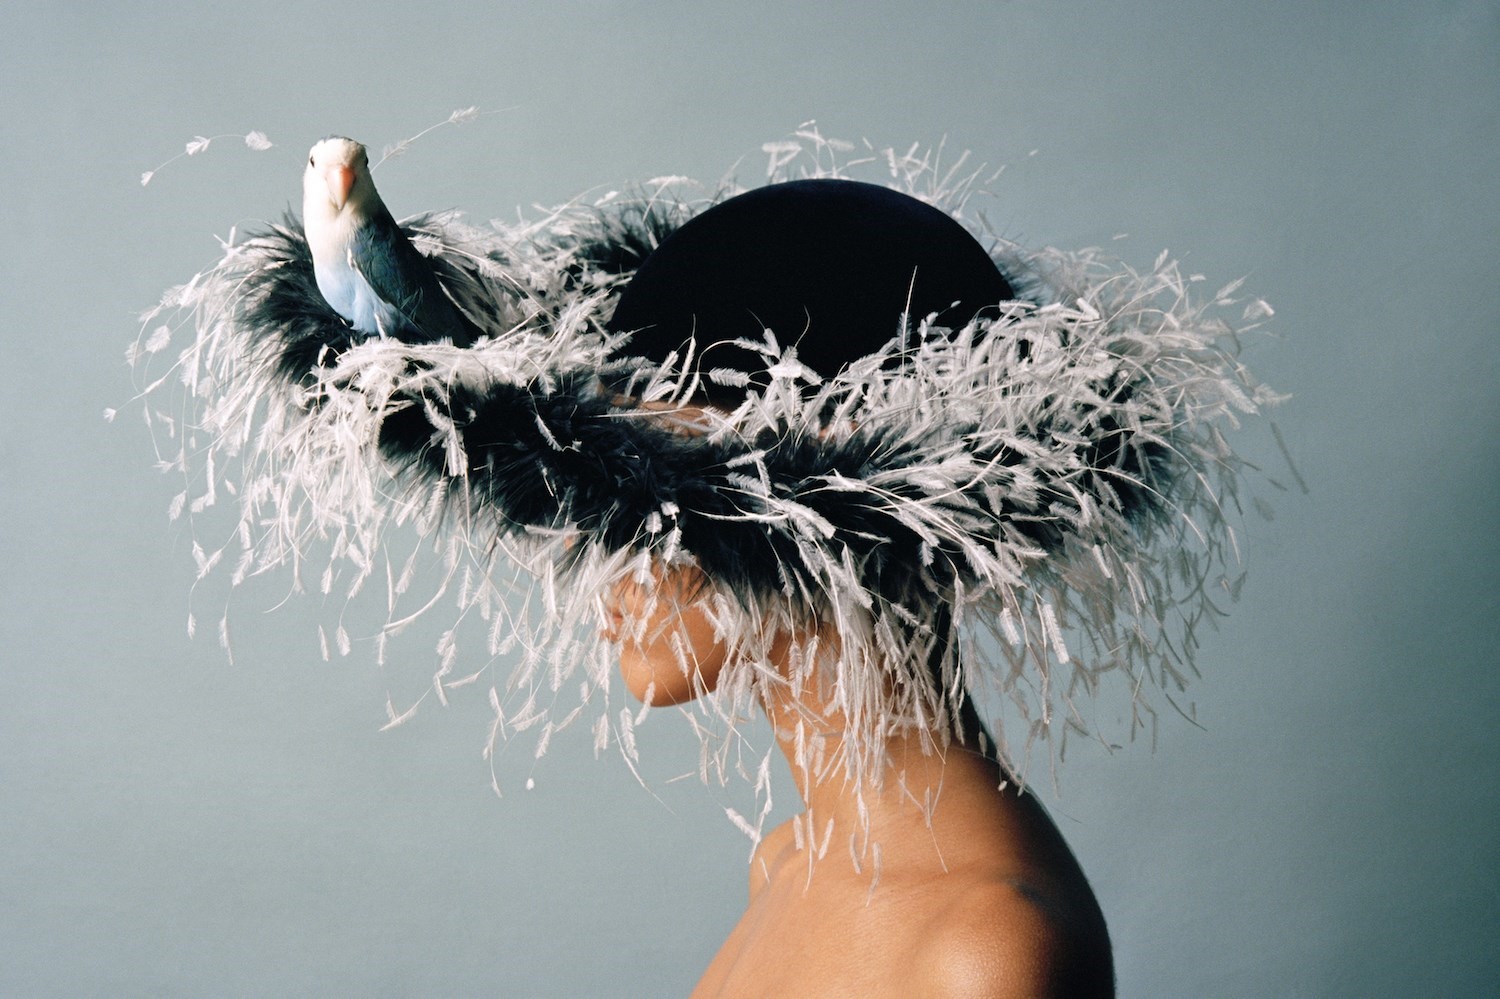 Why We Love the Unapologetic Campness of Feathers